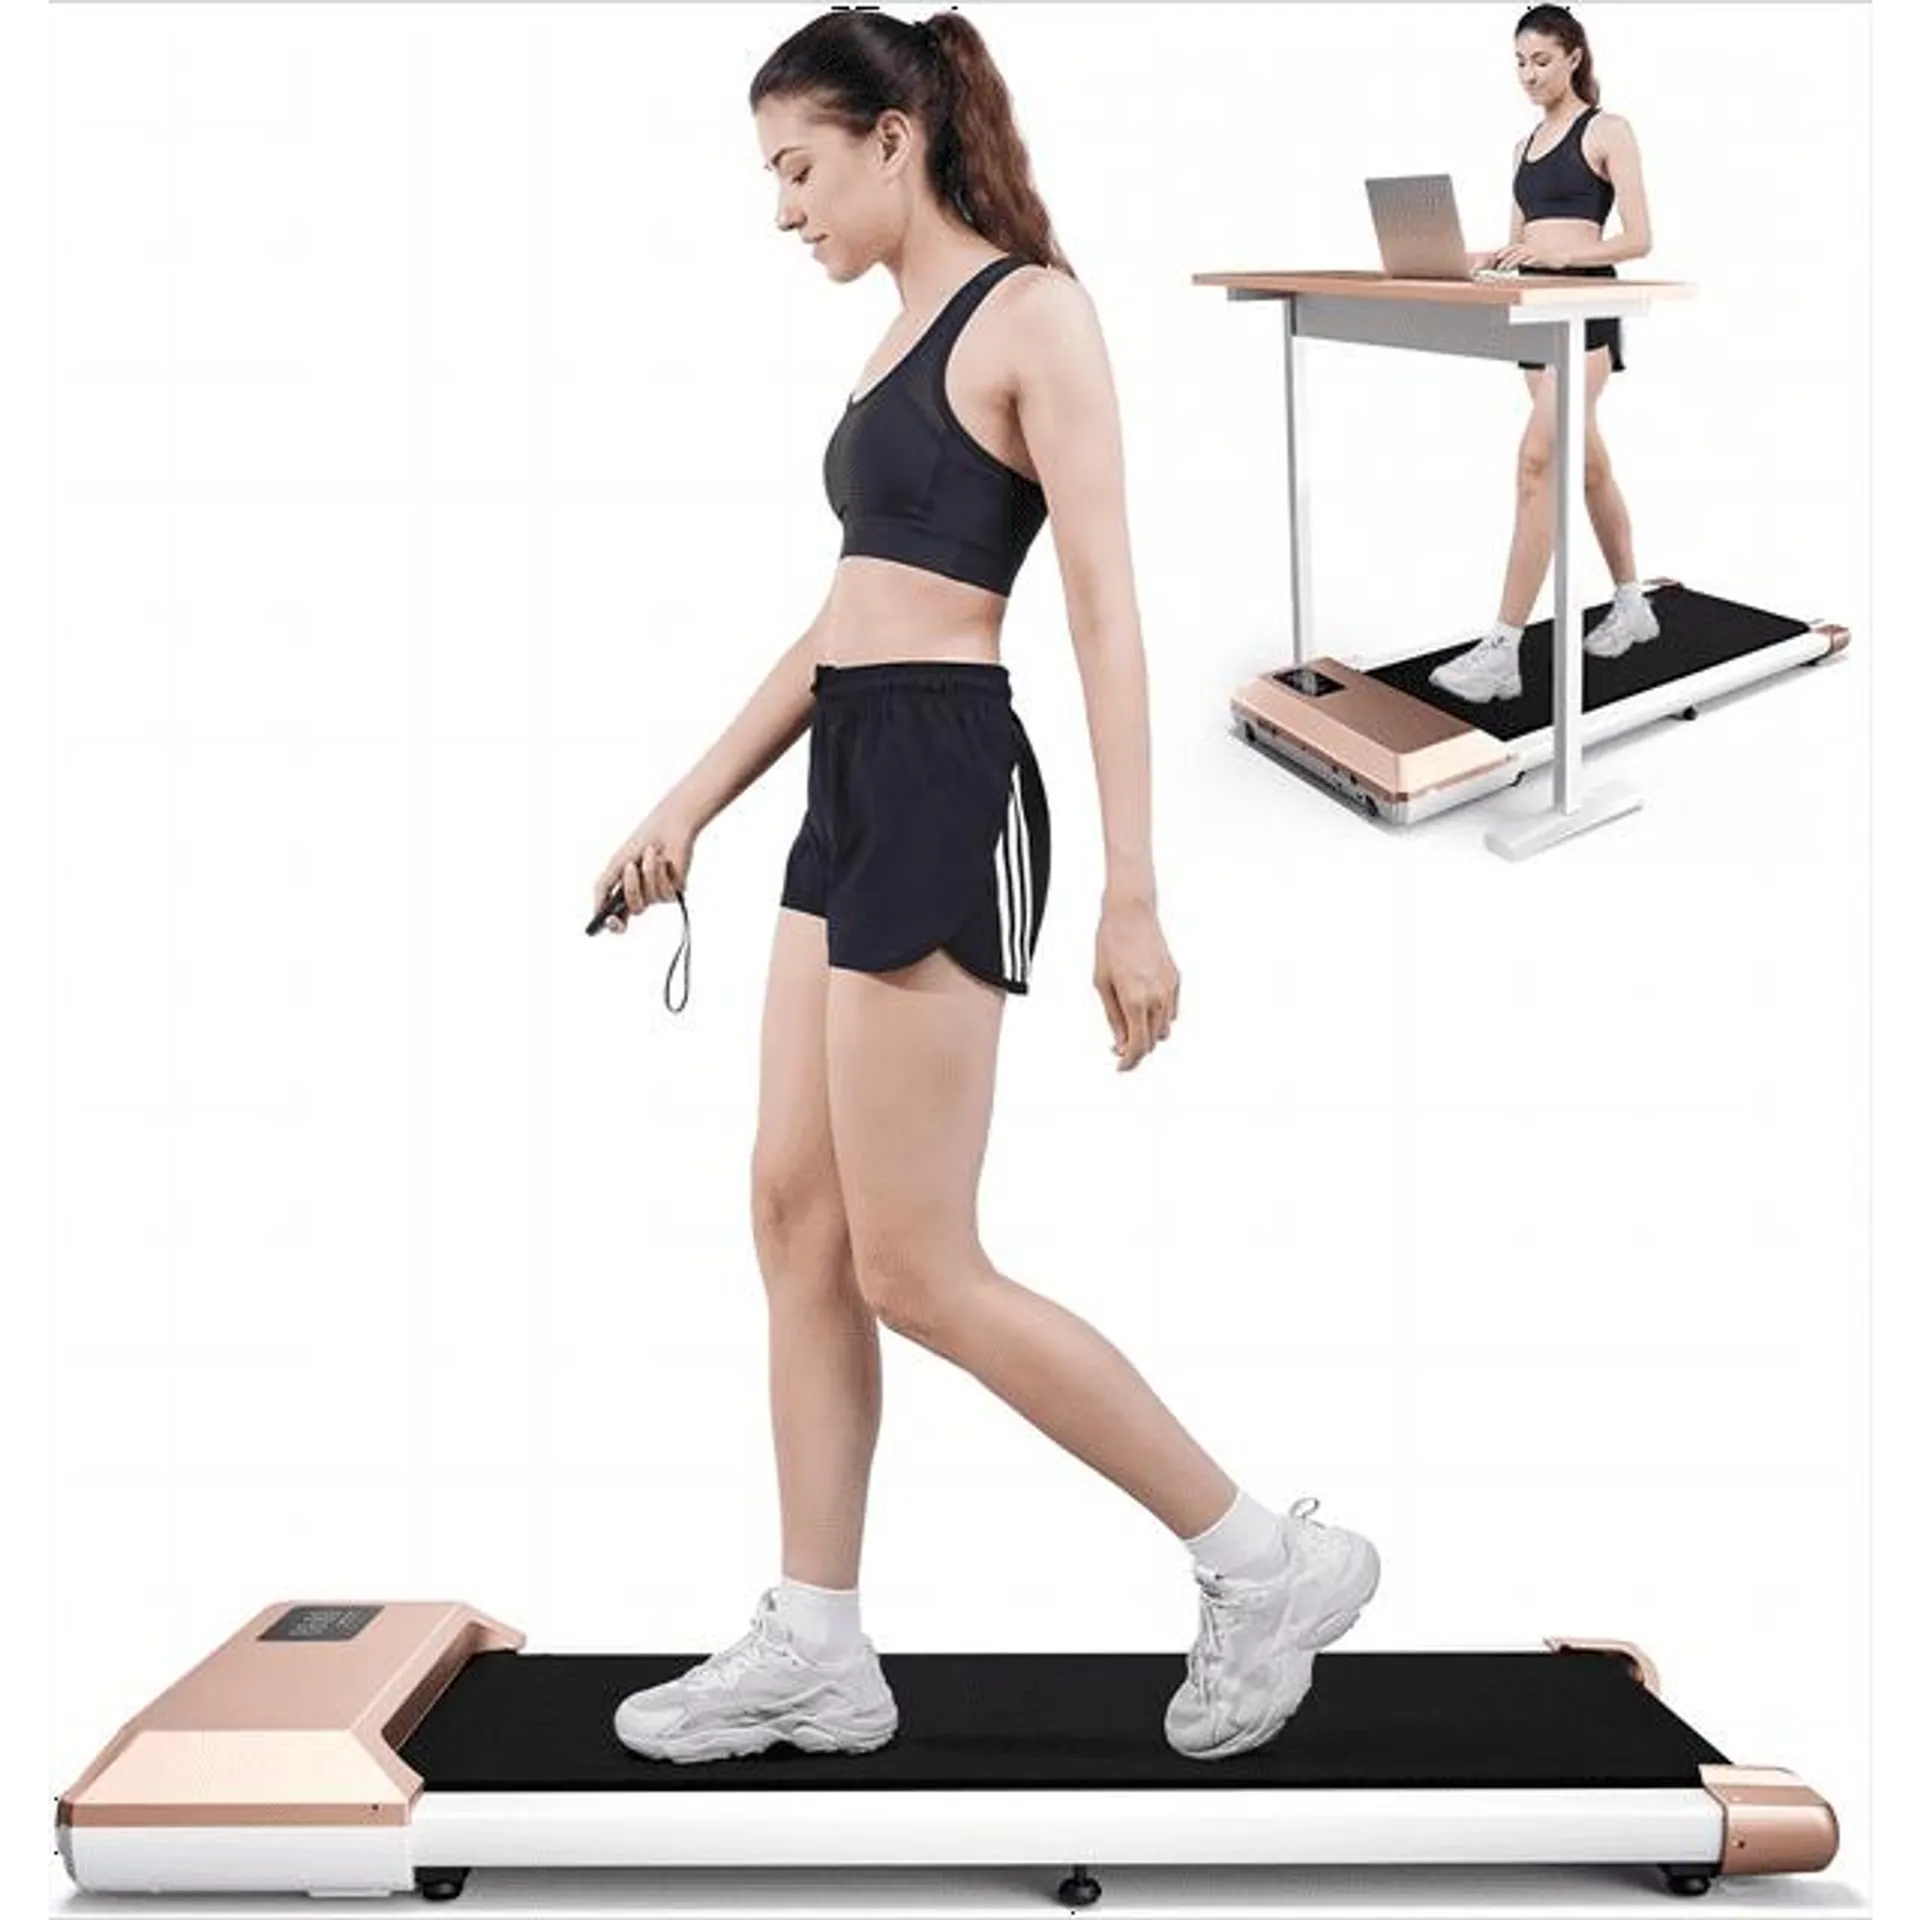 Walking Pad Treadmill 2.5Hp, Ultra-Quiet with Remote Control-Under Desk Treadmill 2 in 1 Walking and Jogging with Remote Control LED Display(Pink)